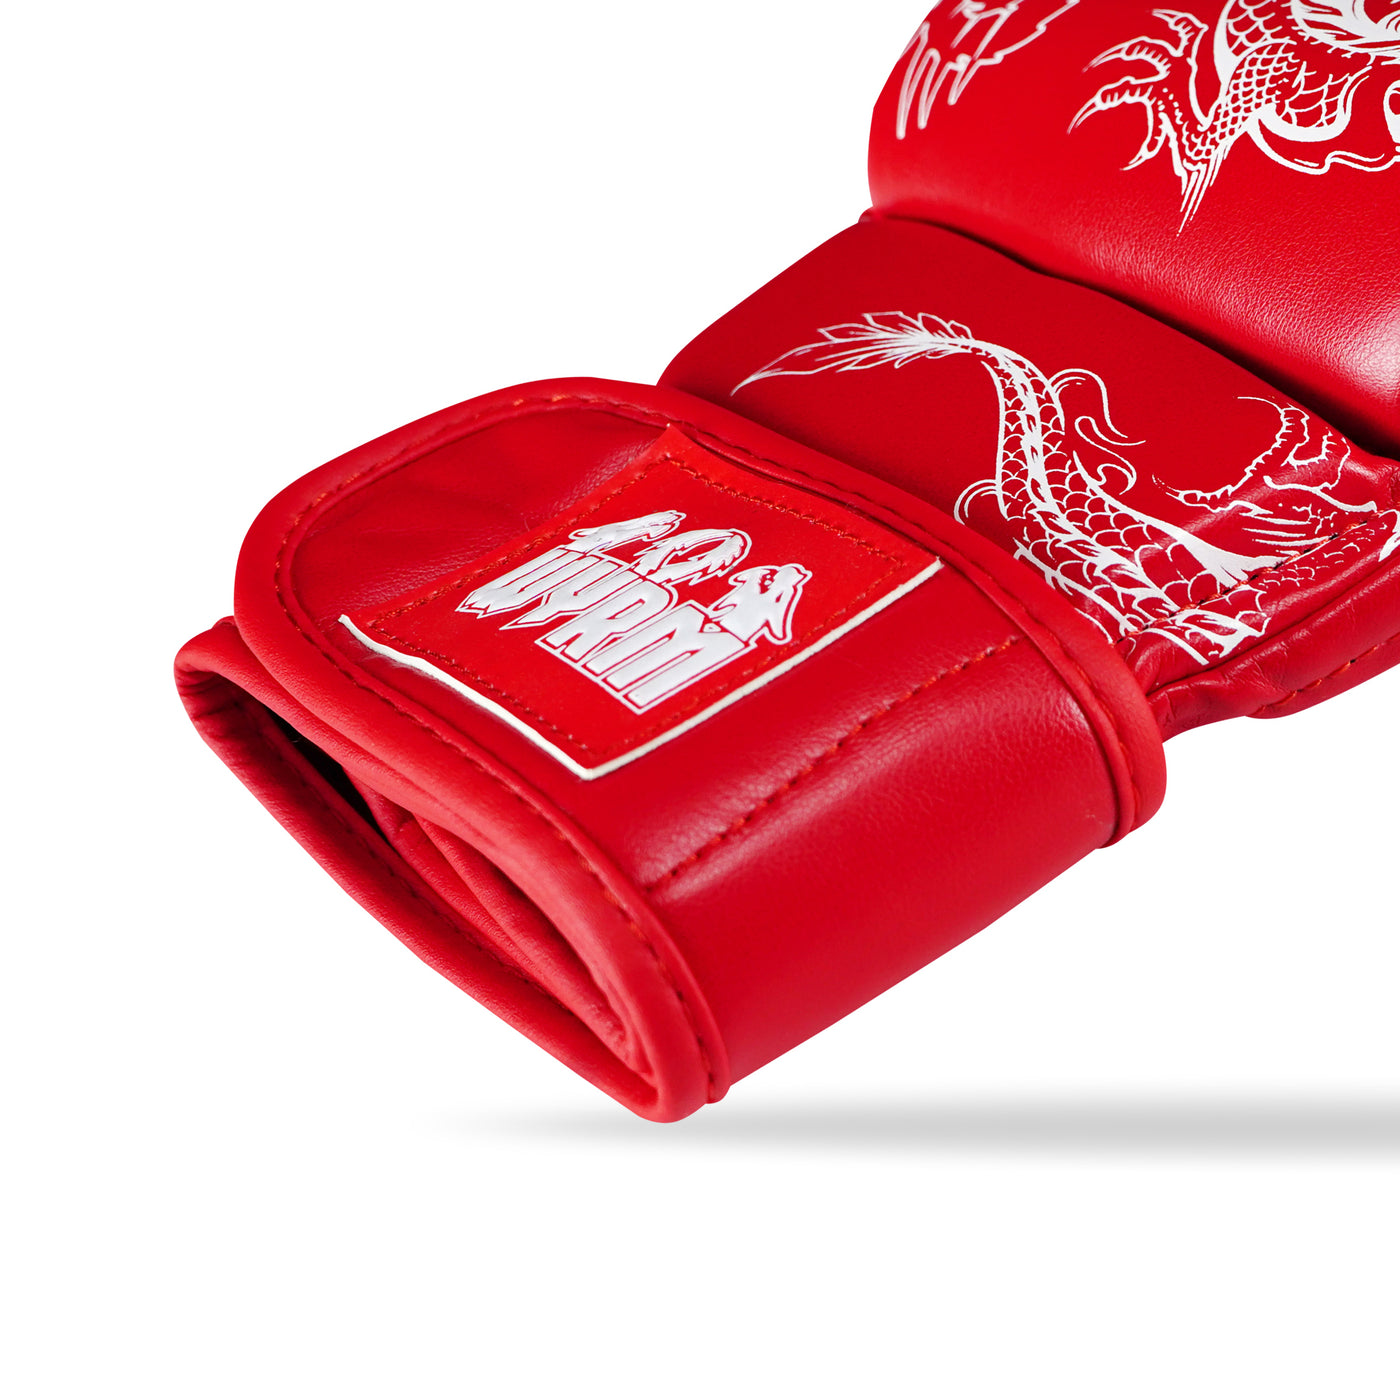 Dragon Red/White MMA Fight Gloves